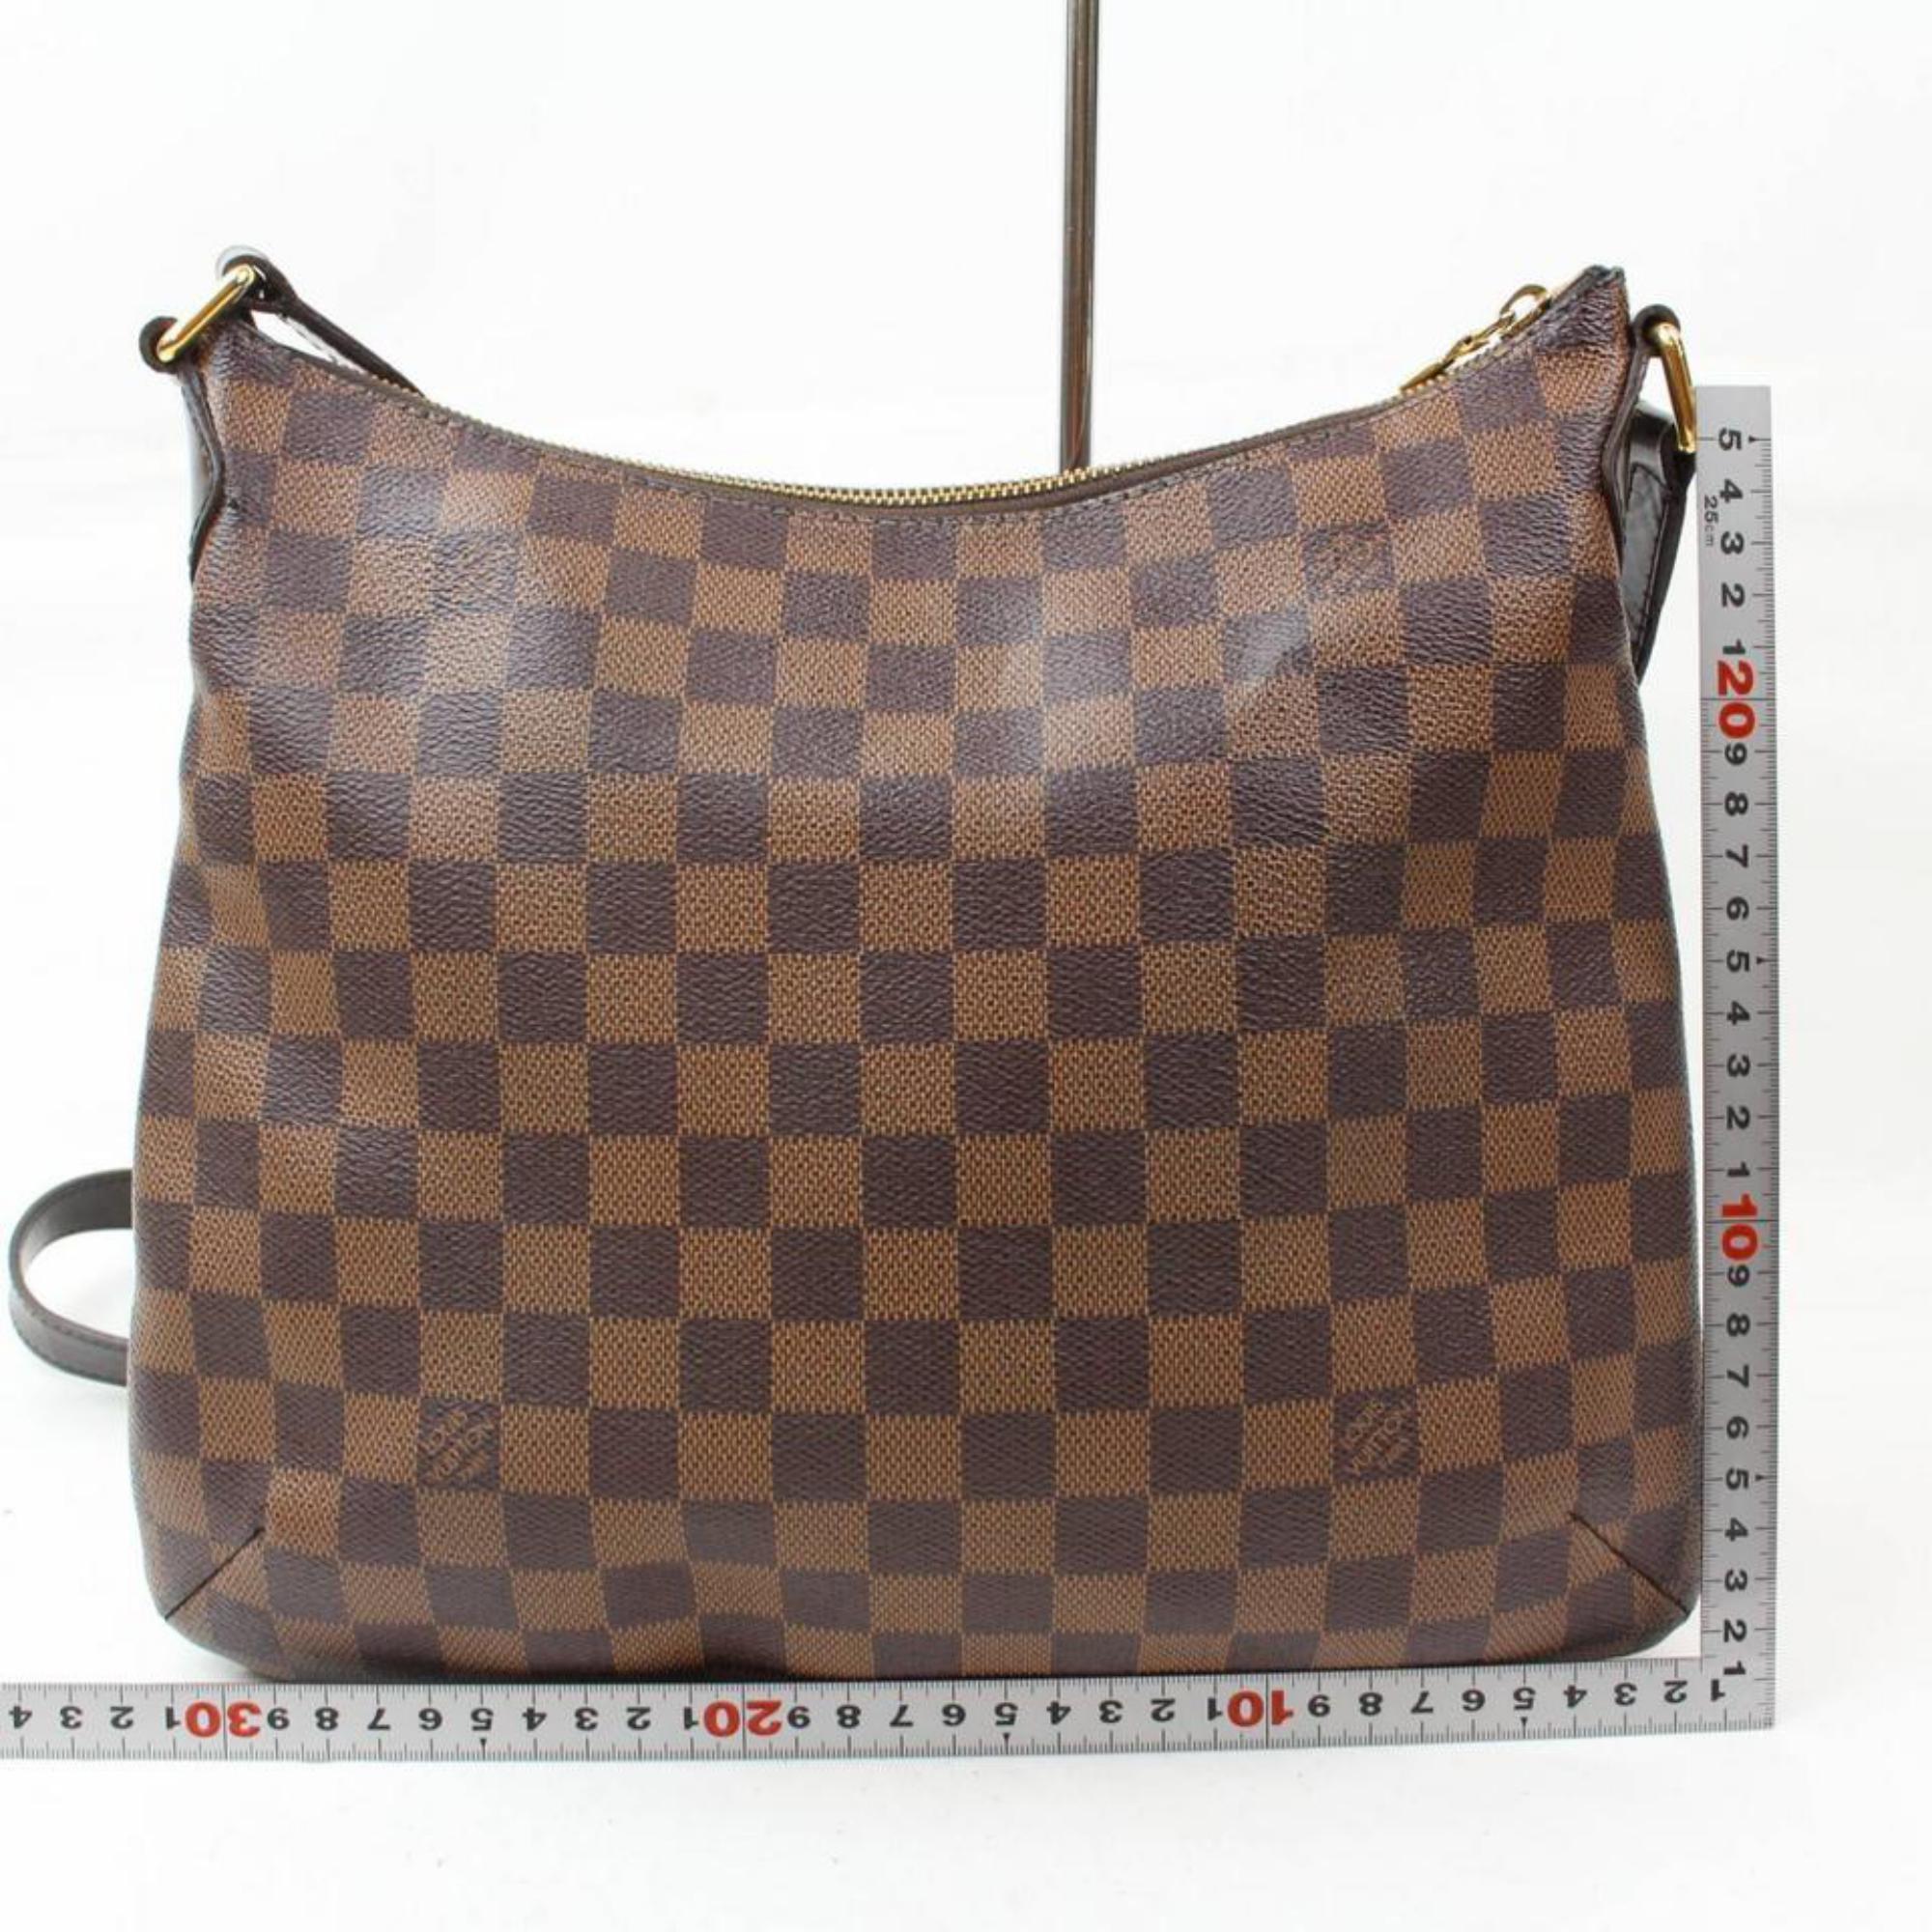 Louis Vuitton Bloomsbury Damier Ebene Pm 868703 Coated Canvas Cross Body Bag For Sale 1